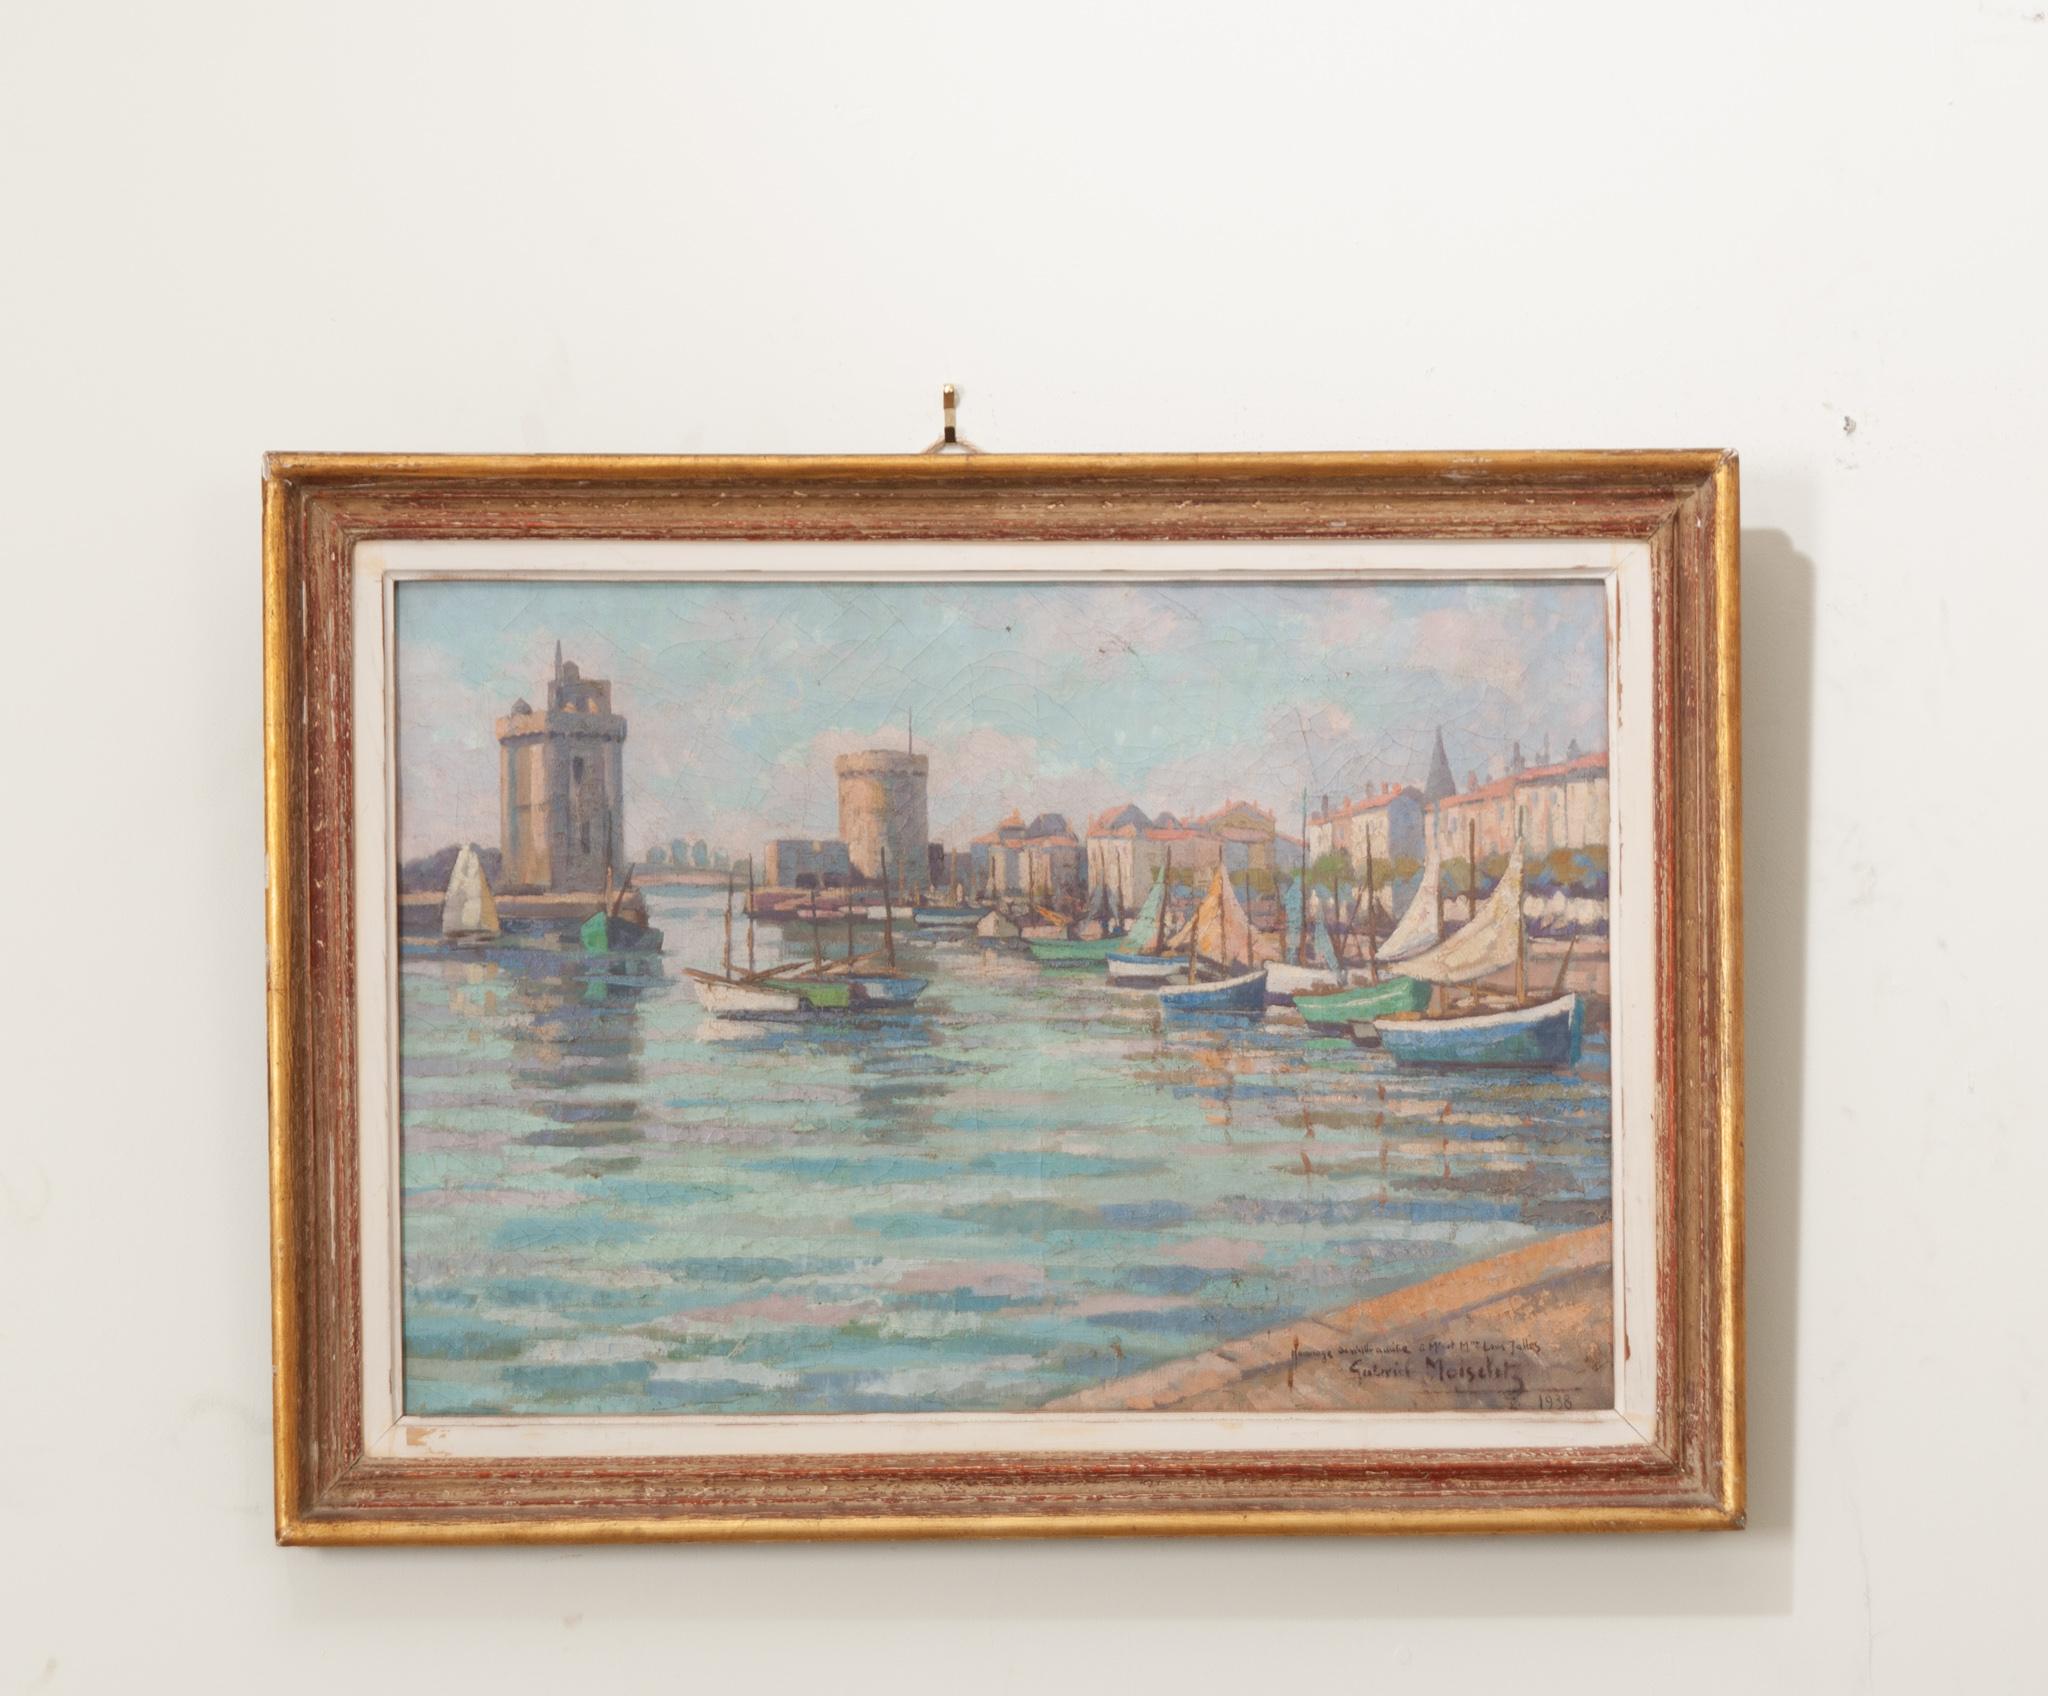 A charming and pastel colored oil on canvas featuring the “Port of La Rochelle” circa 1938.  Signed by the artist, Gabriel Moiselet. Beautifully done with wonderful brushwork and soft color. This painting is framed in a delicate gold gilt frame. Be